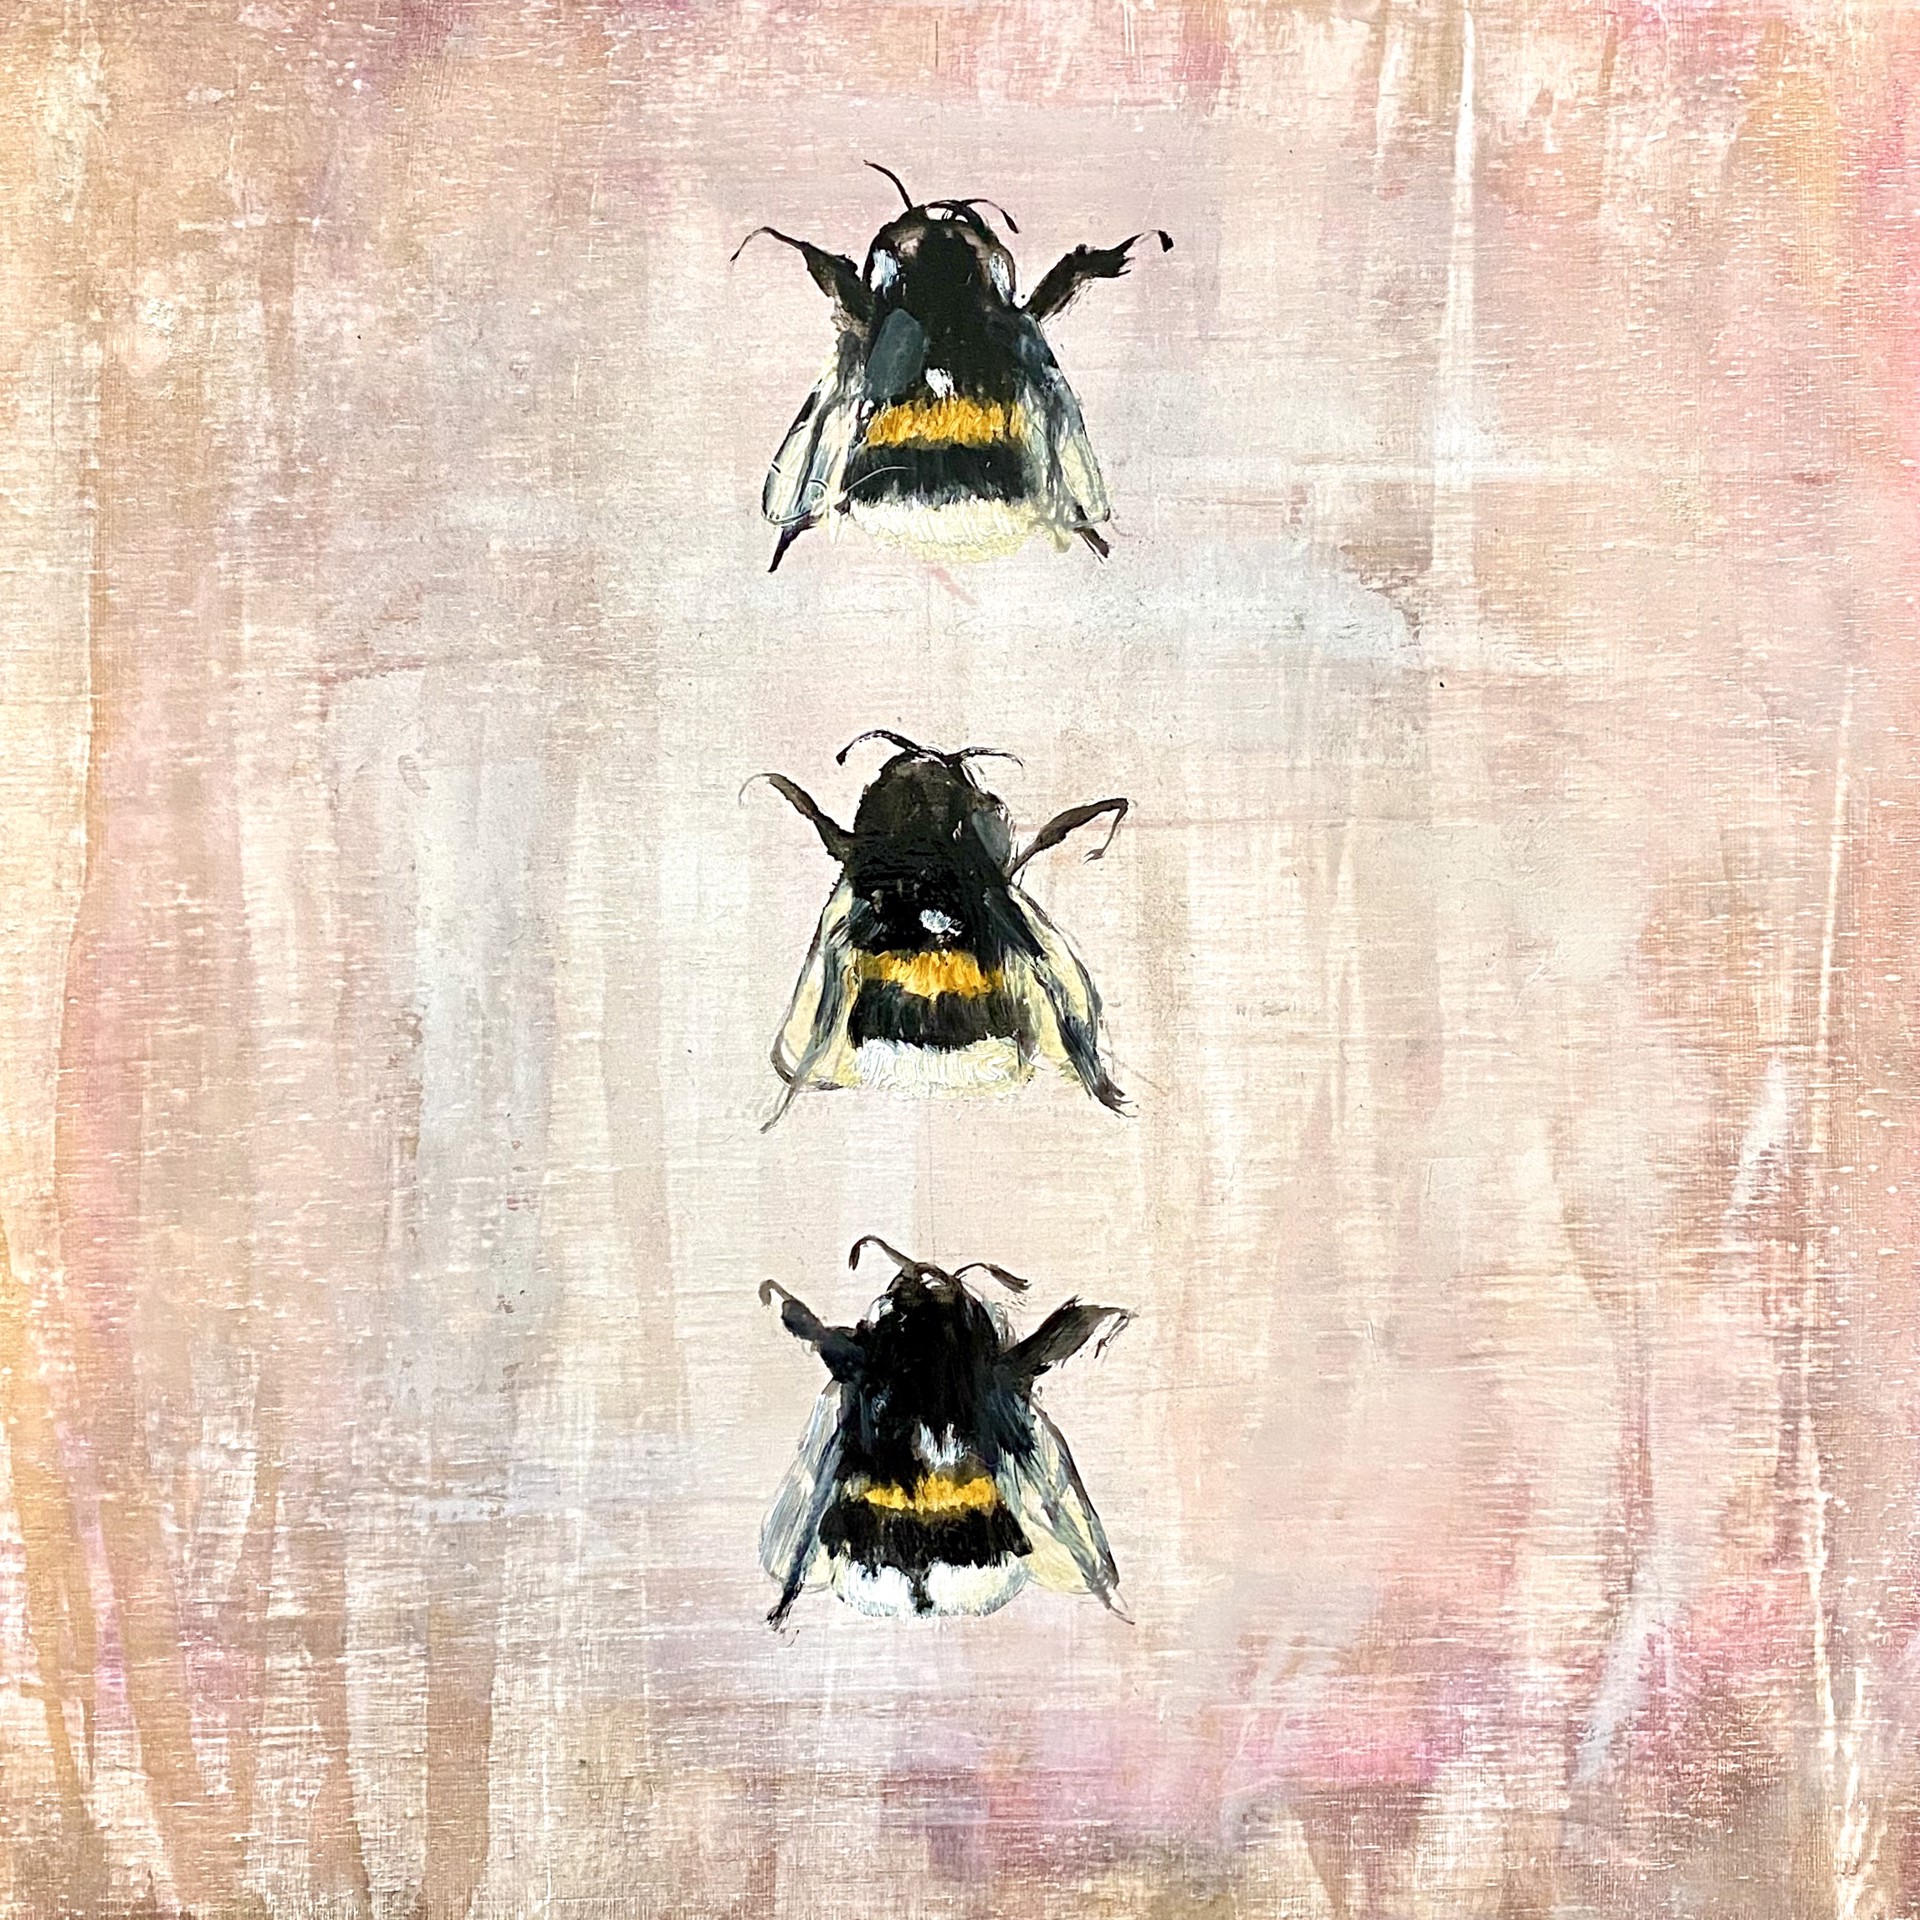 A Contemporary Oil Painting Of Three Bumblebees On A Pink Background By Jenna Von Benedikt Available At Gallery Wild